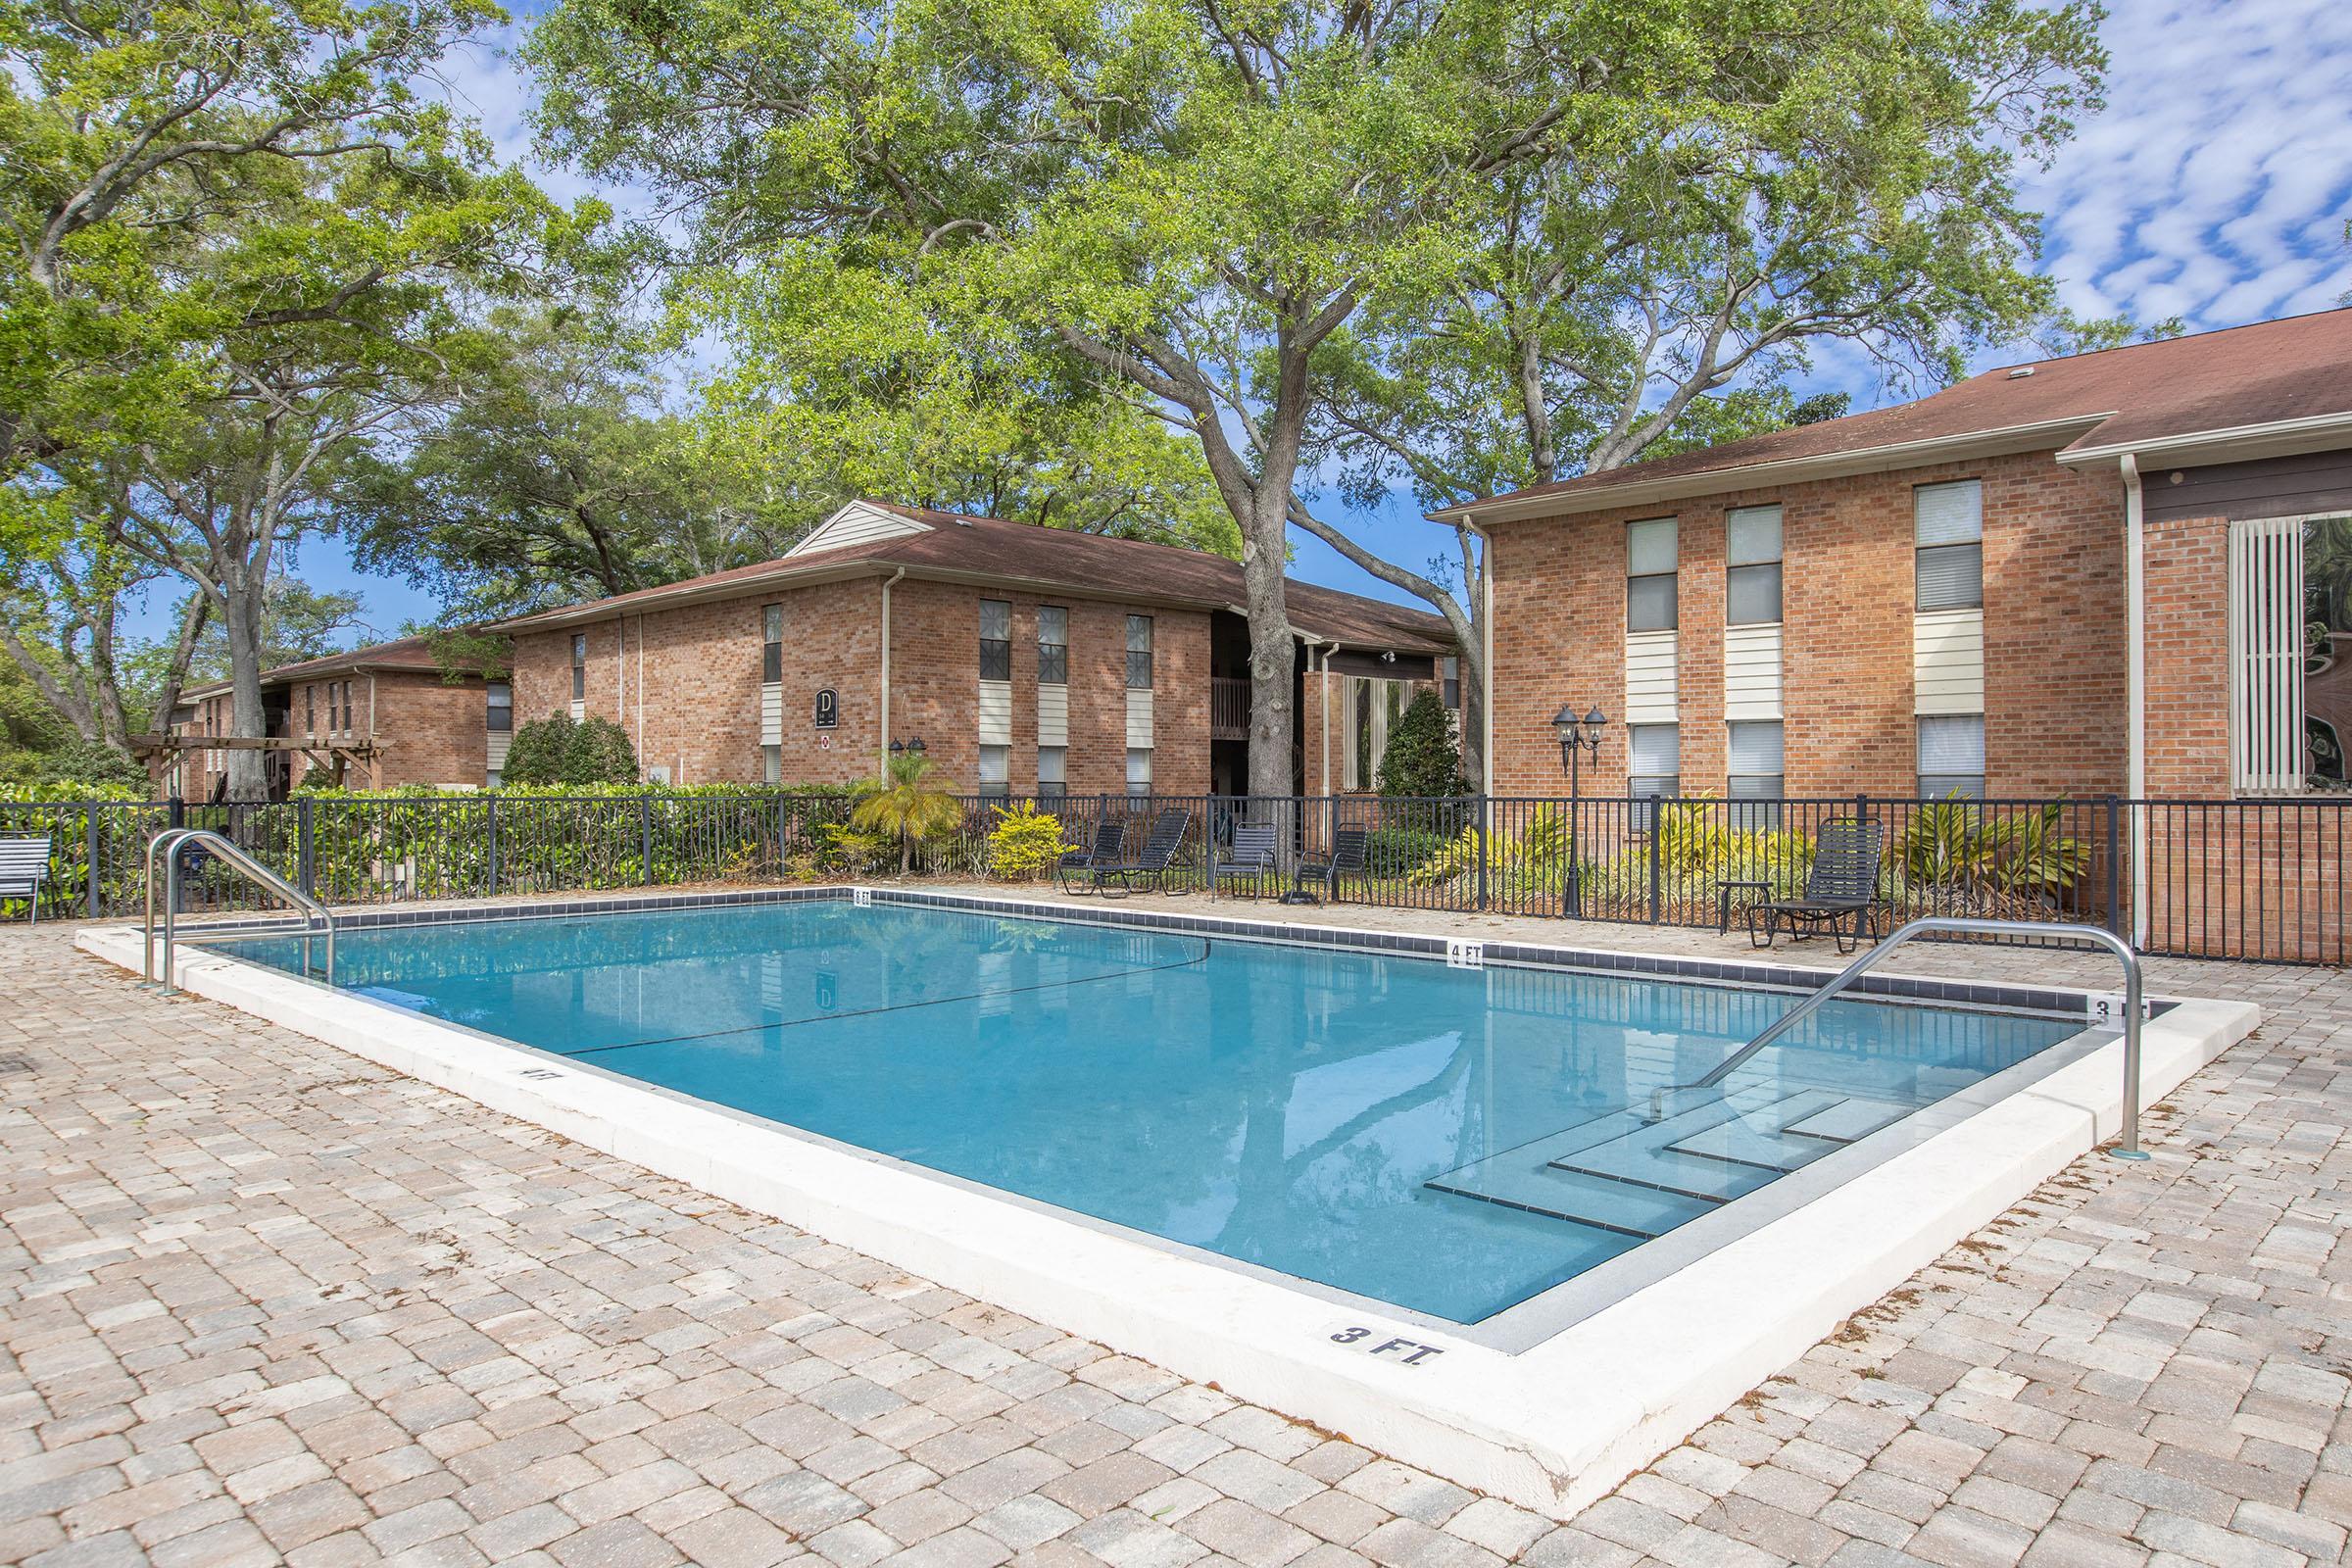 a pool in front of a brick building